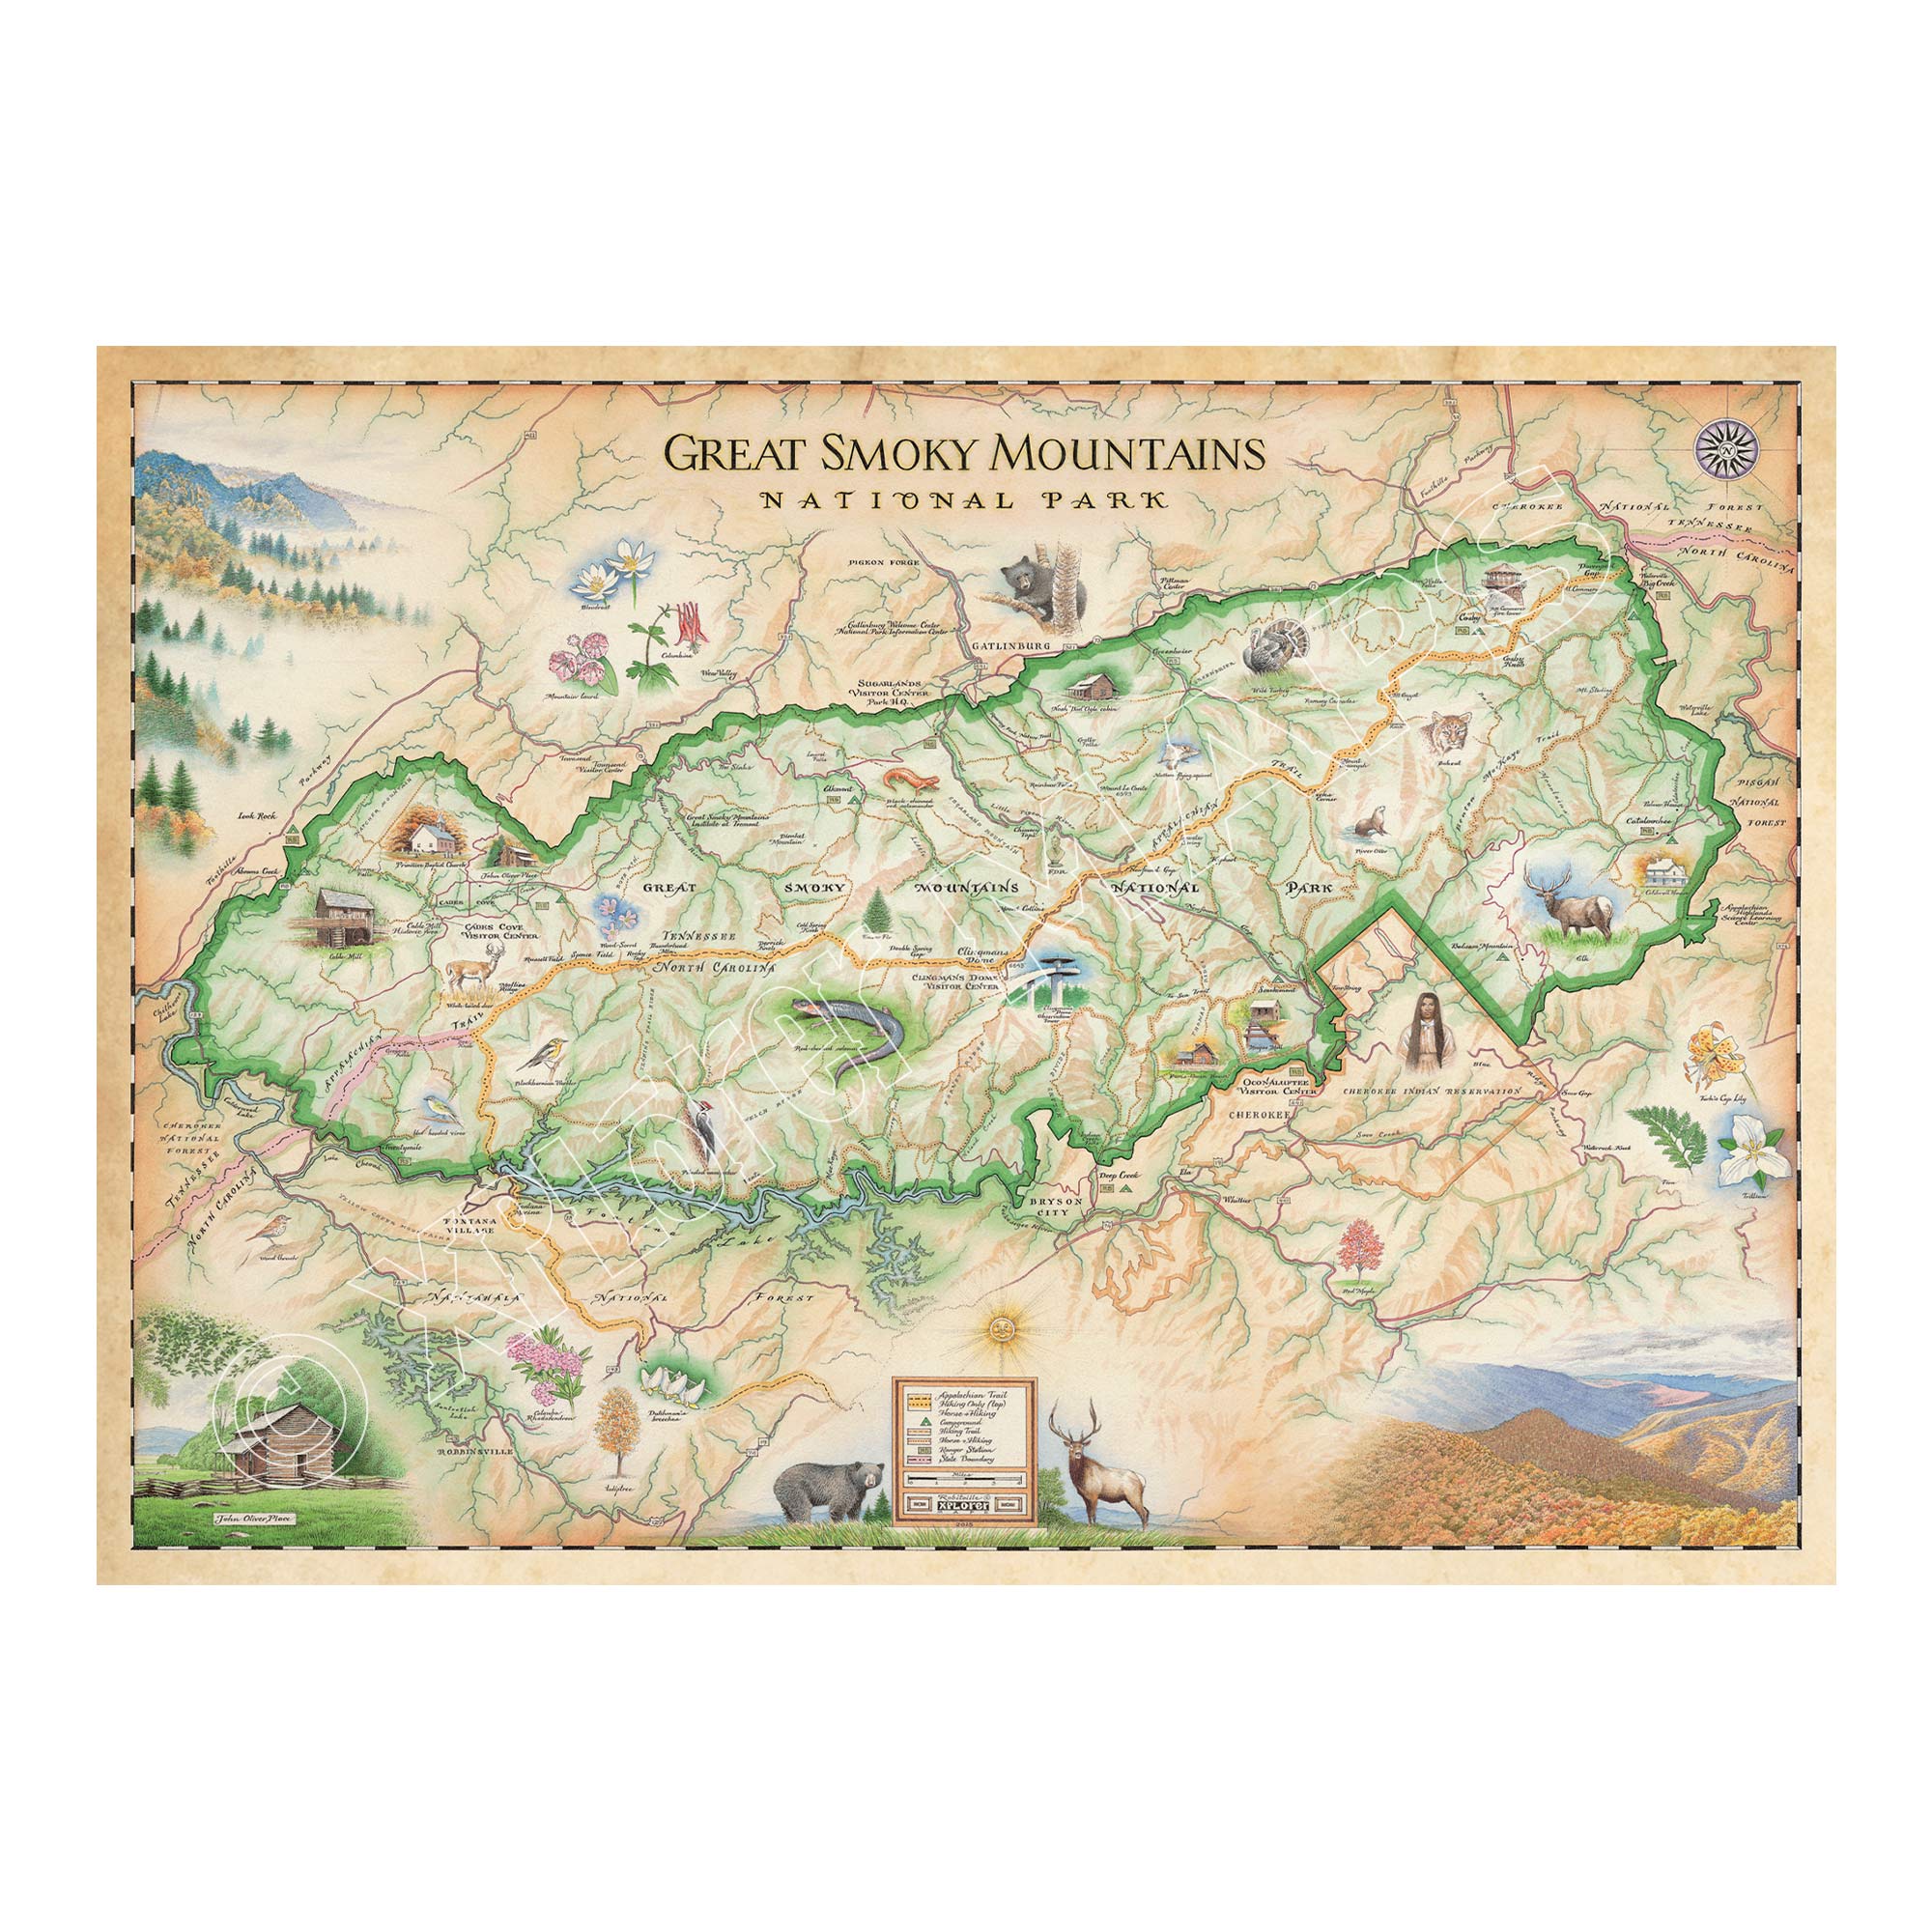 Great Smoky Mountains National Park hand-drawn map in earth tones colors beige and green. The map depicts the entire National Park on the border of North Carolina and Tennessee. It features illustrations of salamander, woodpecker, Clingman's Dome, Sugarland's Visitor Center, Oconoluftee Visitor Center. Measures 24x18.